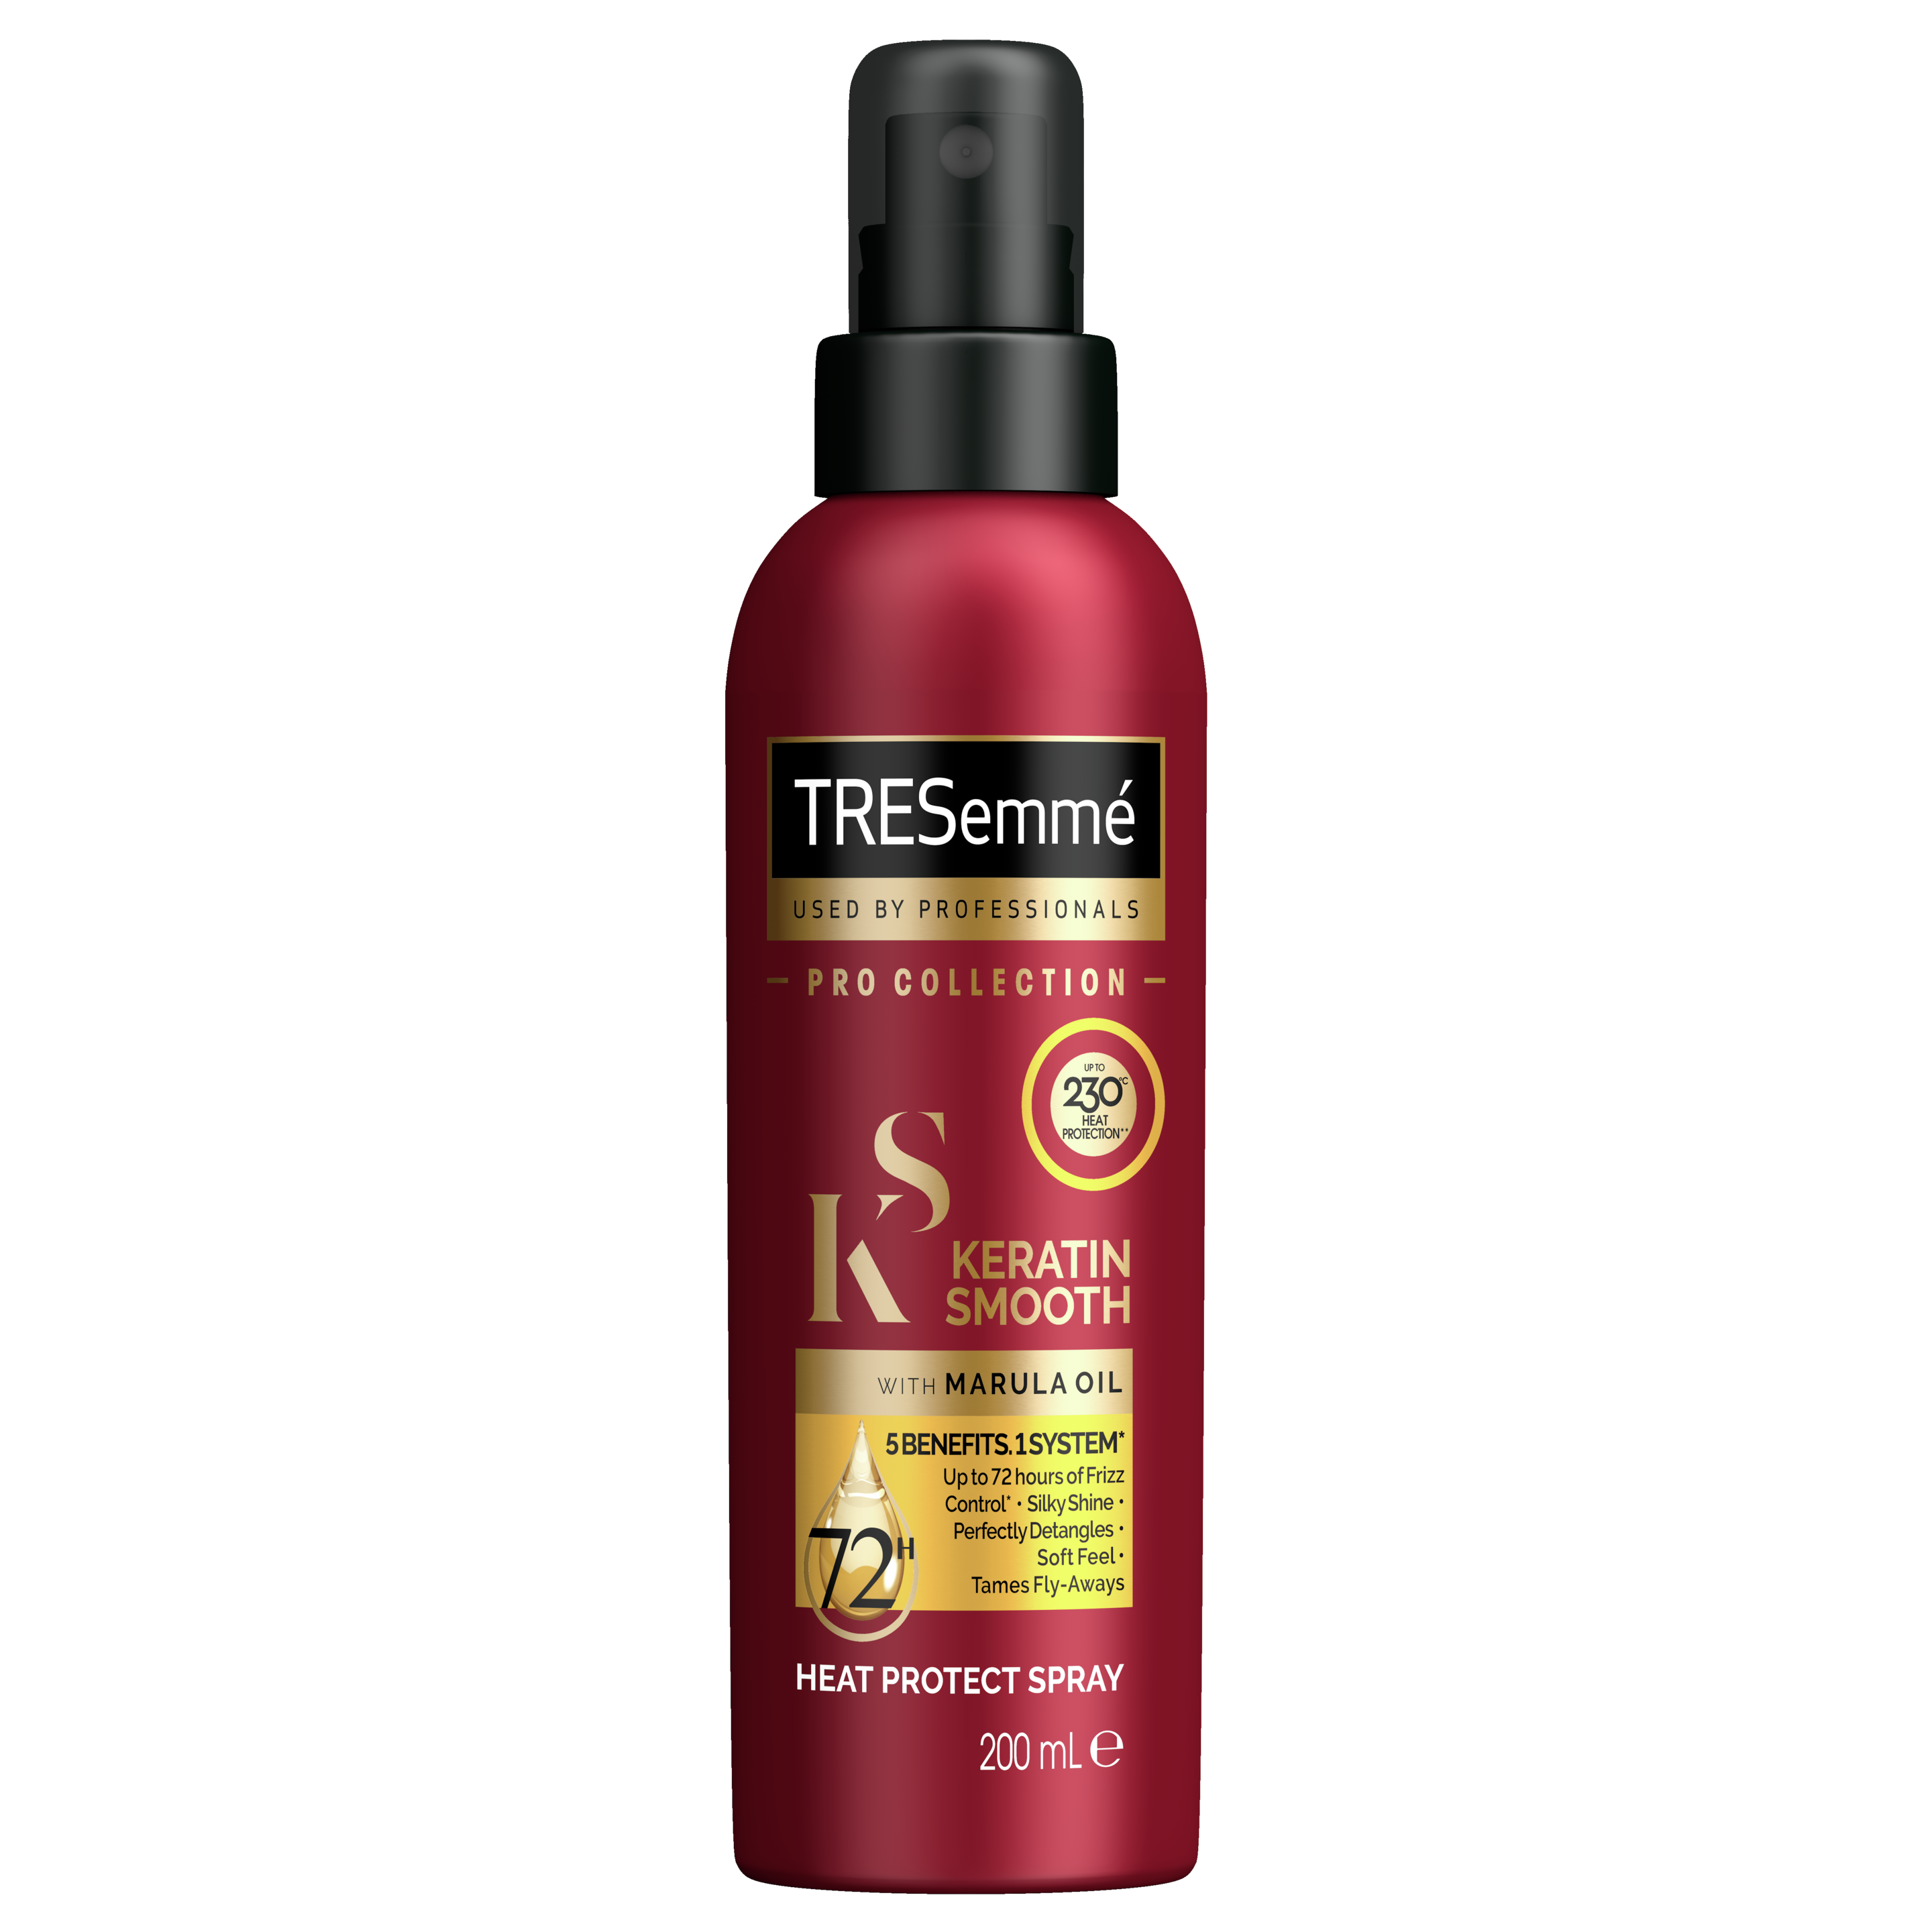 A 200ml bottle of TRESemmé Keratin Smooth Heat Protect Spray front of pack image